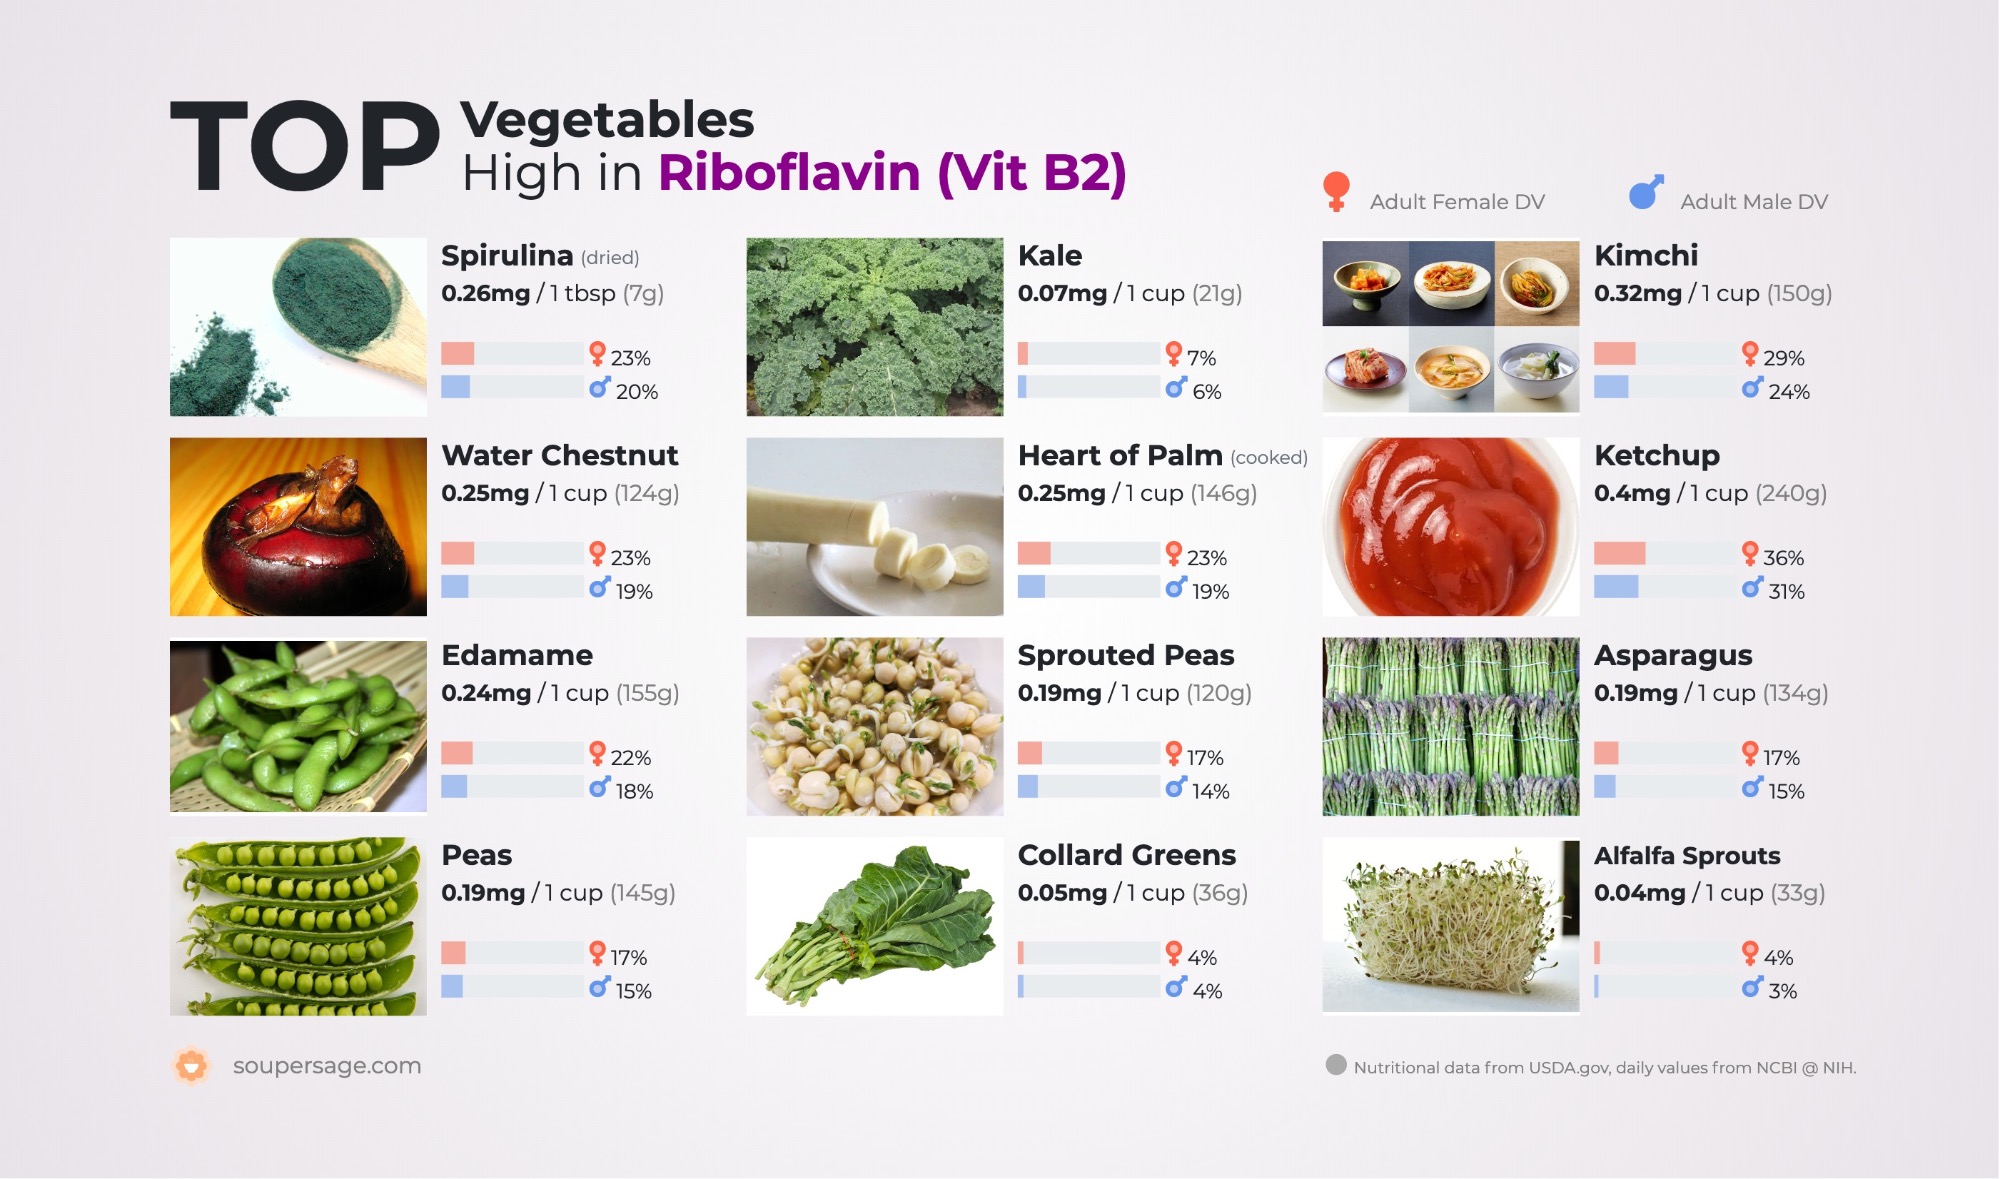 image of Top Vegetables High in Riboflavin (Vit B2)